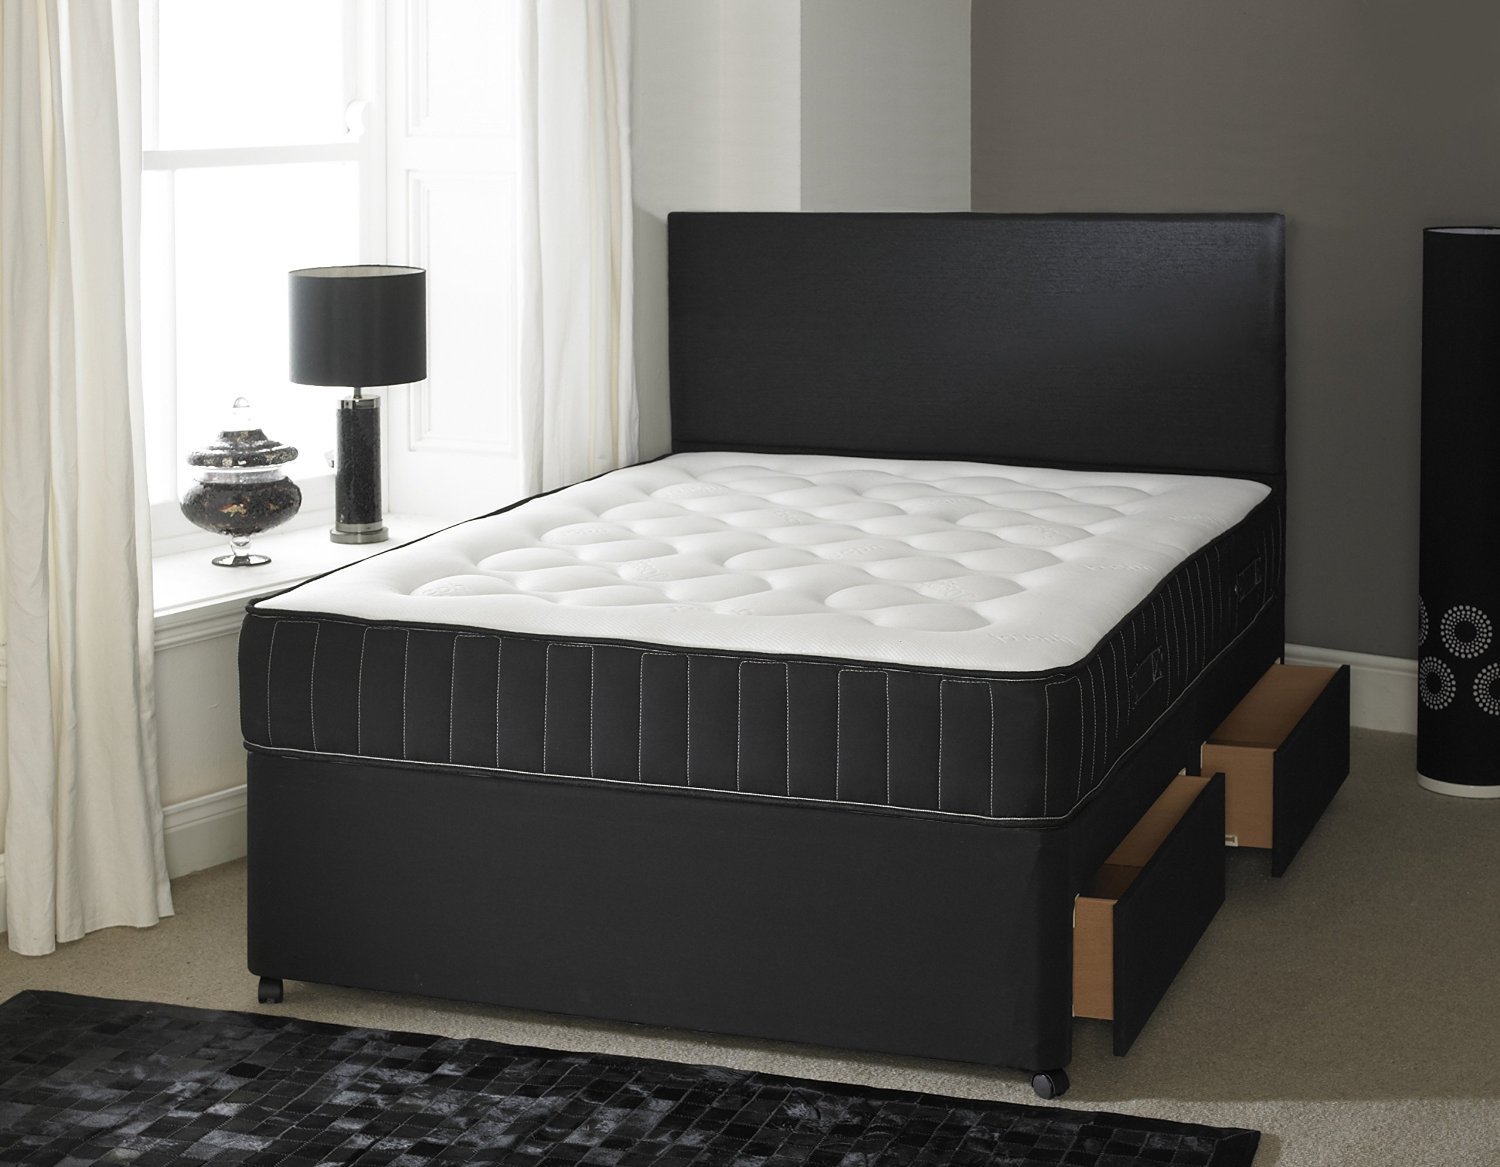 Double Bed Mattresses